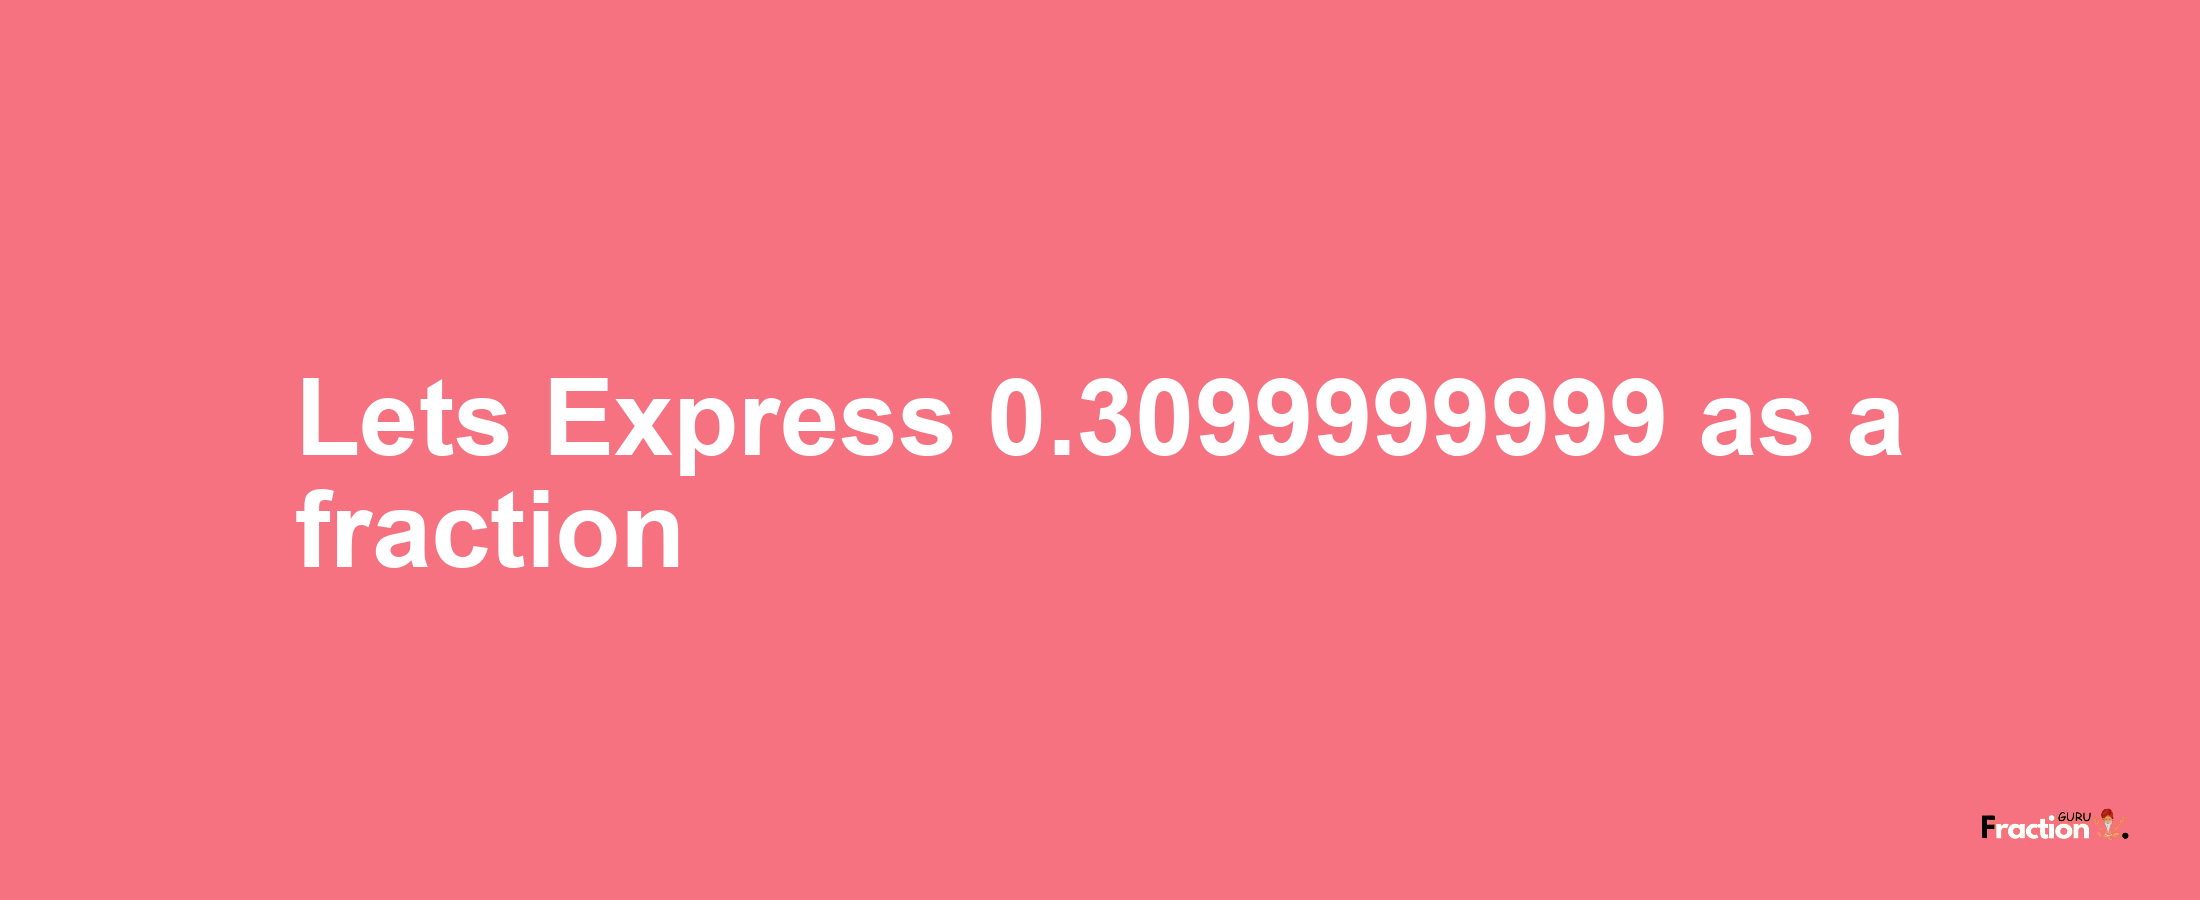 Lets Express 0.3099999999 as afraction